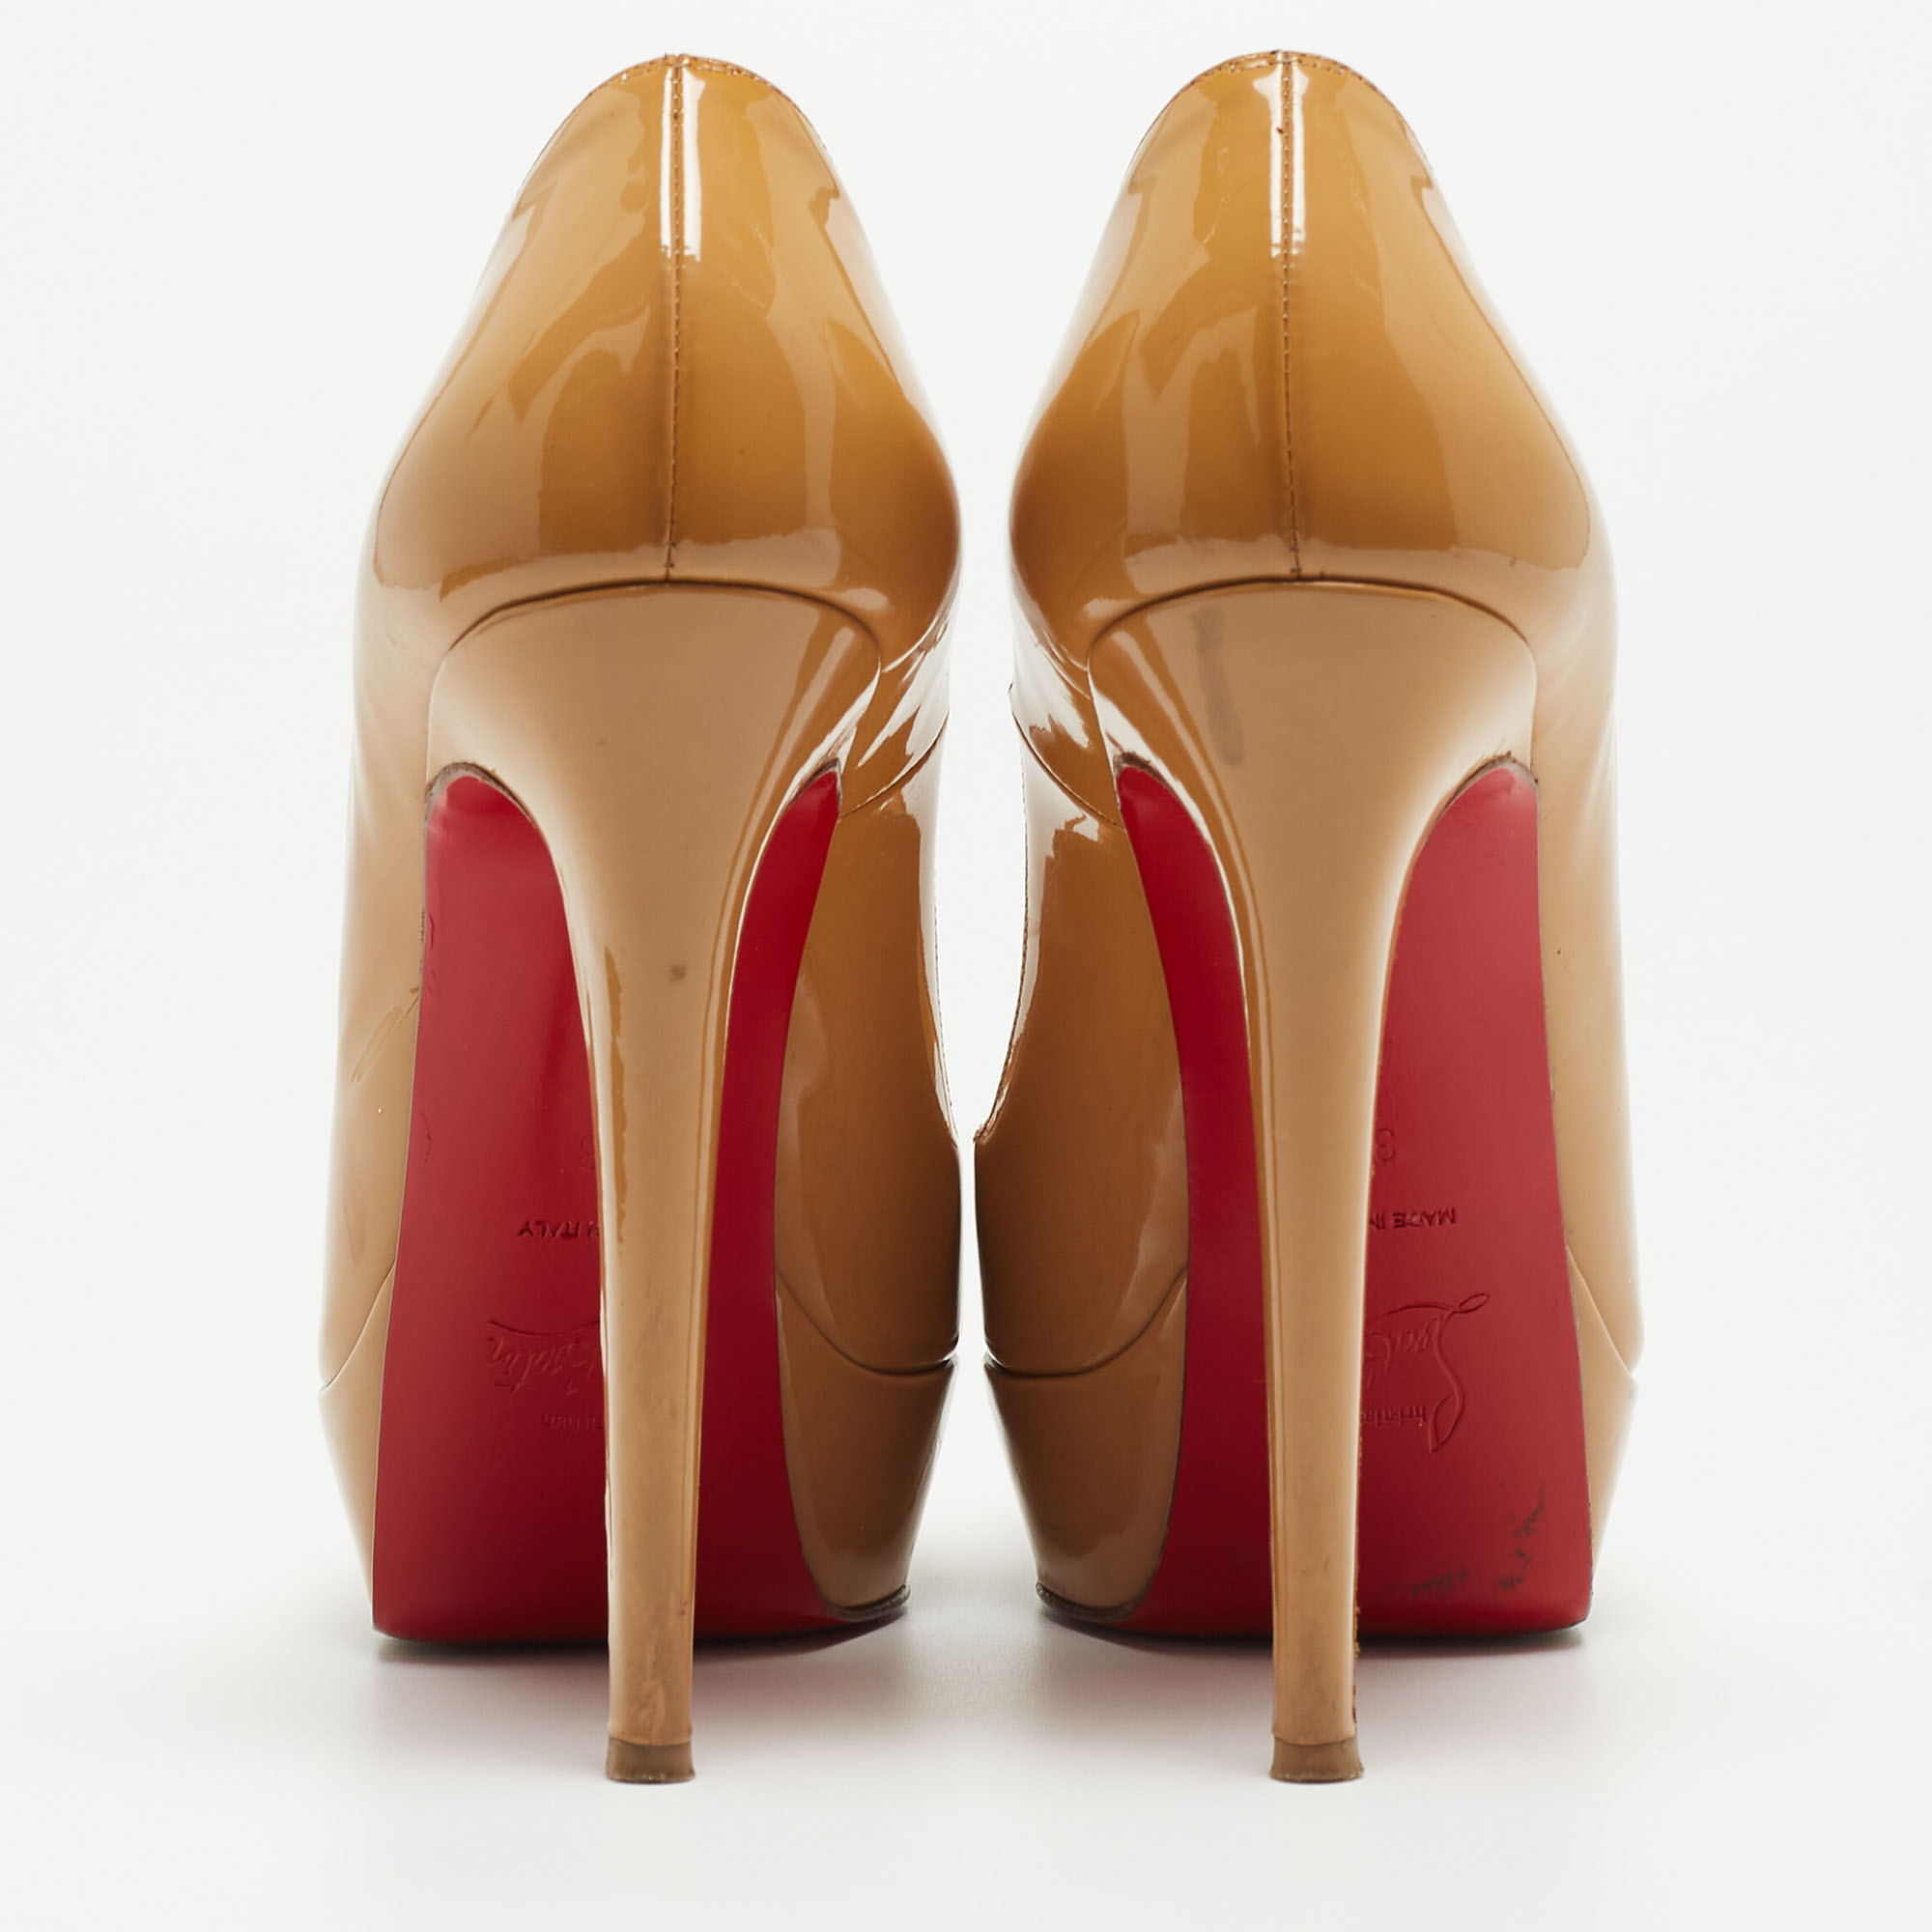 Christian Louboutin Beige Patent Very Prive Pumps Size 38